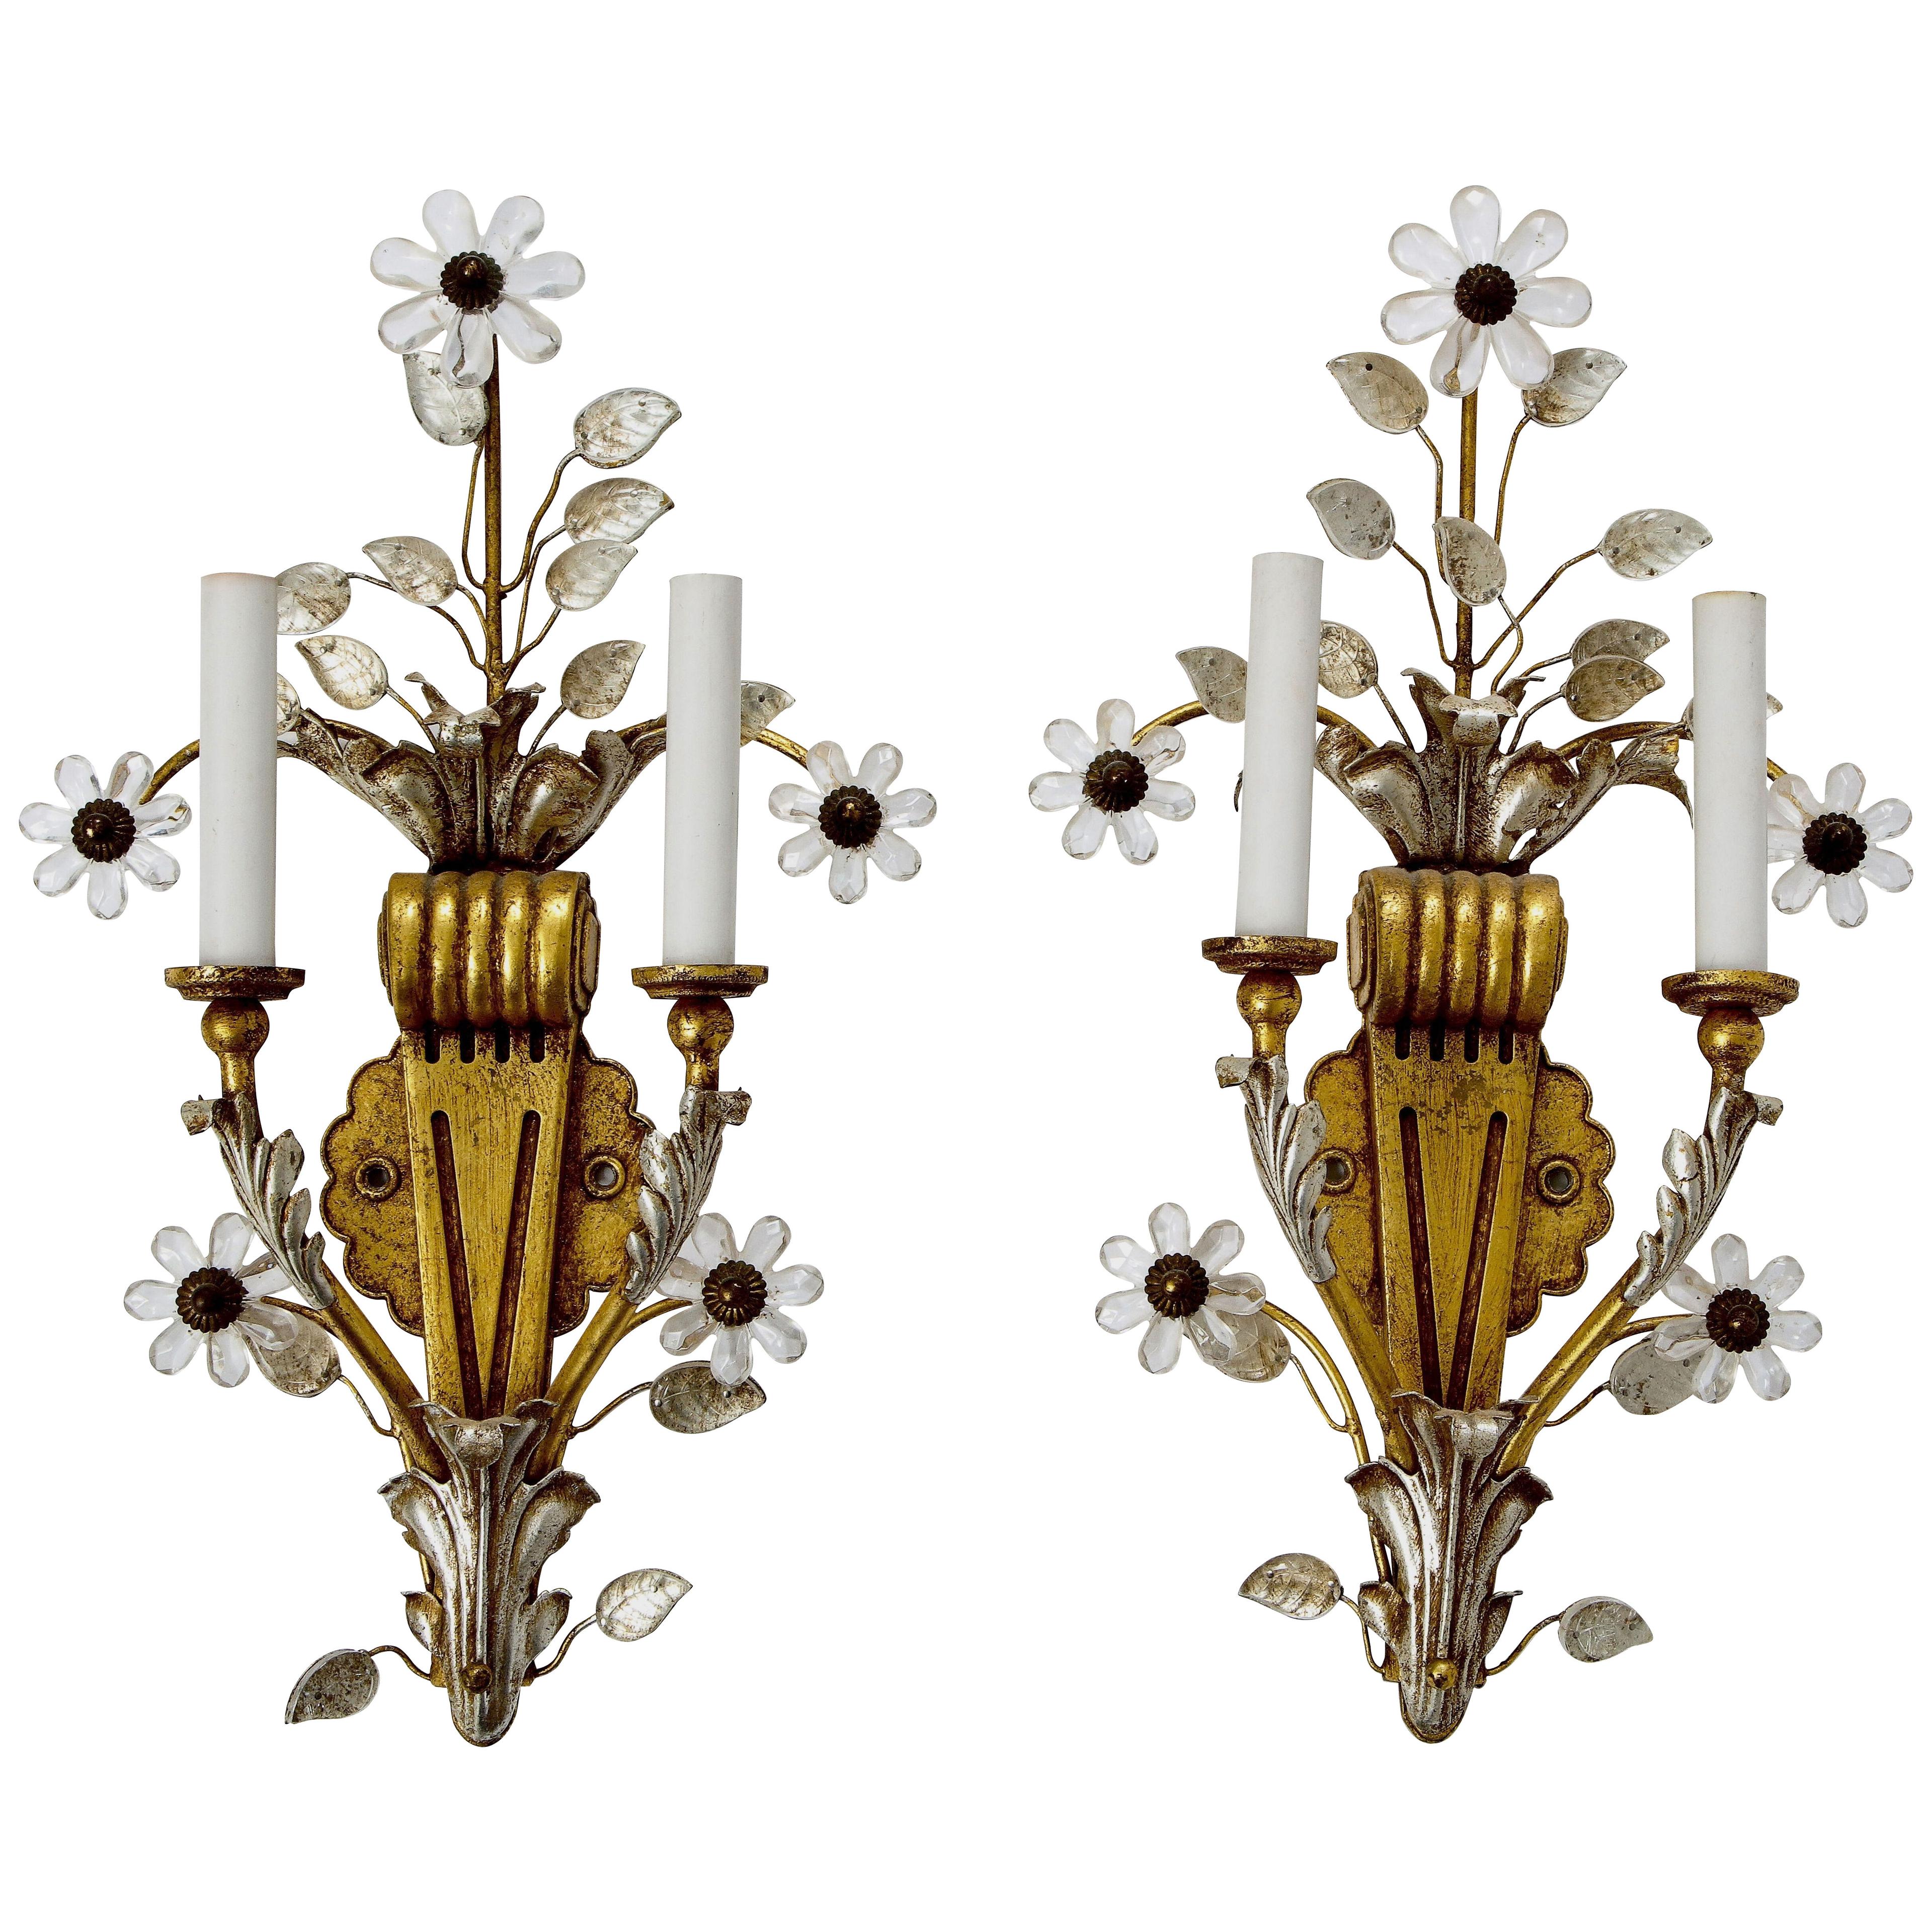 Pair of Gilt and Silvered Bronze Banci Sconces with Rock Crystal Floral Motif.